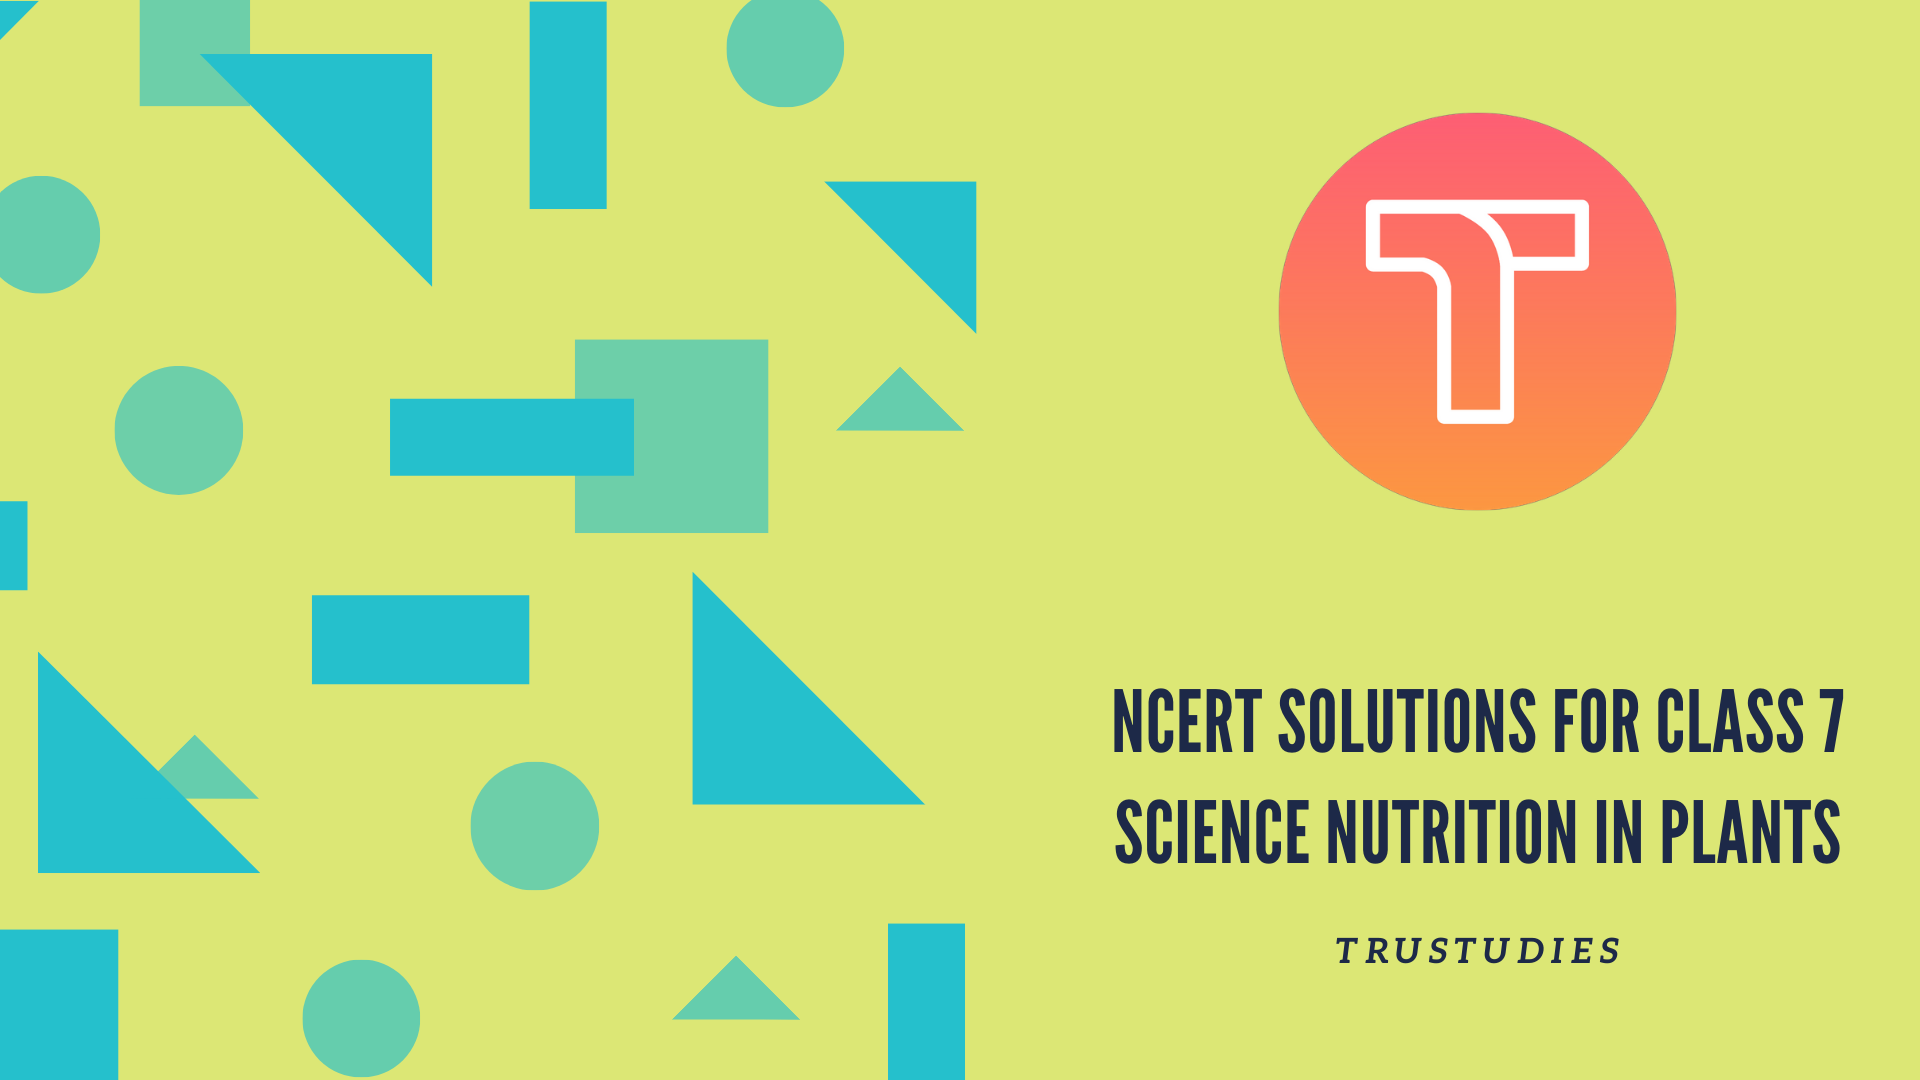 NCERT solutions for class 7 science chapter 1 nutrition in plants banner image